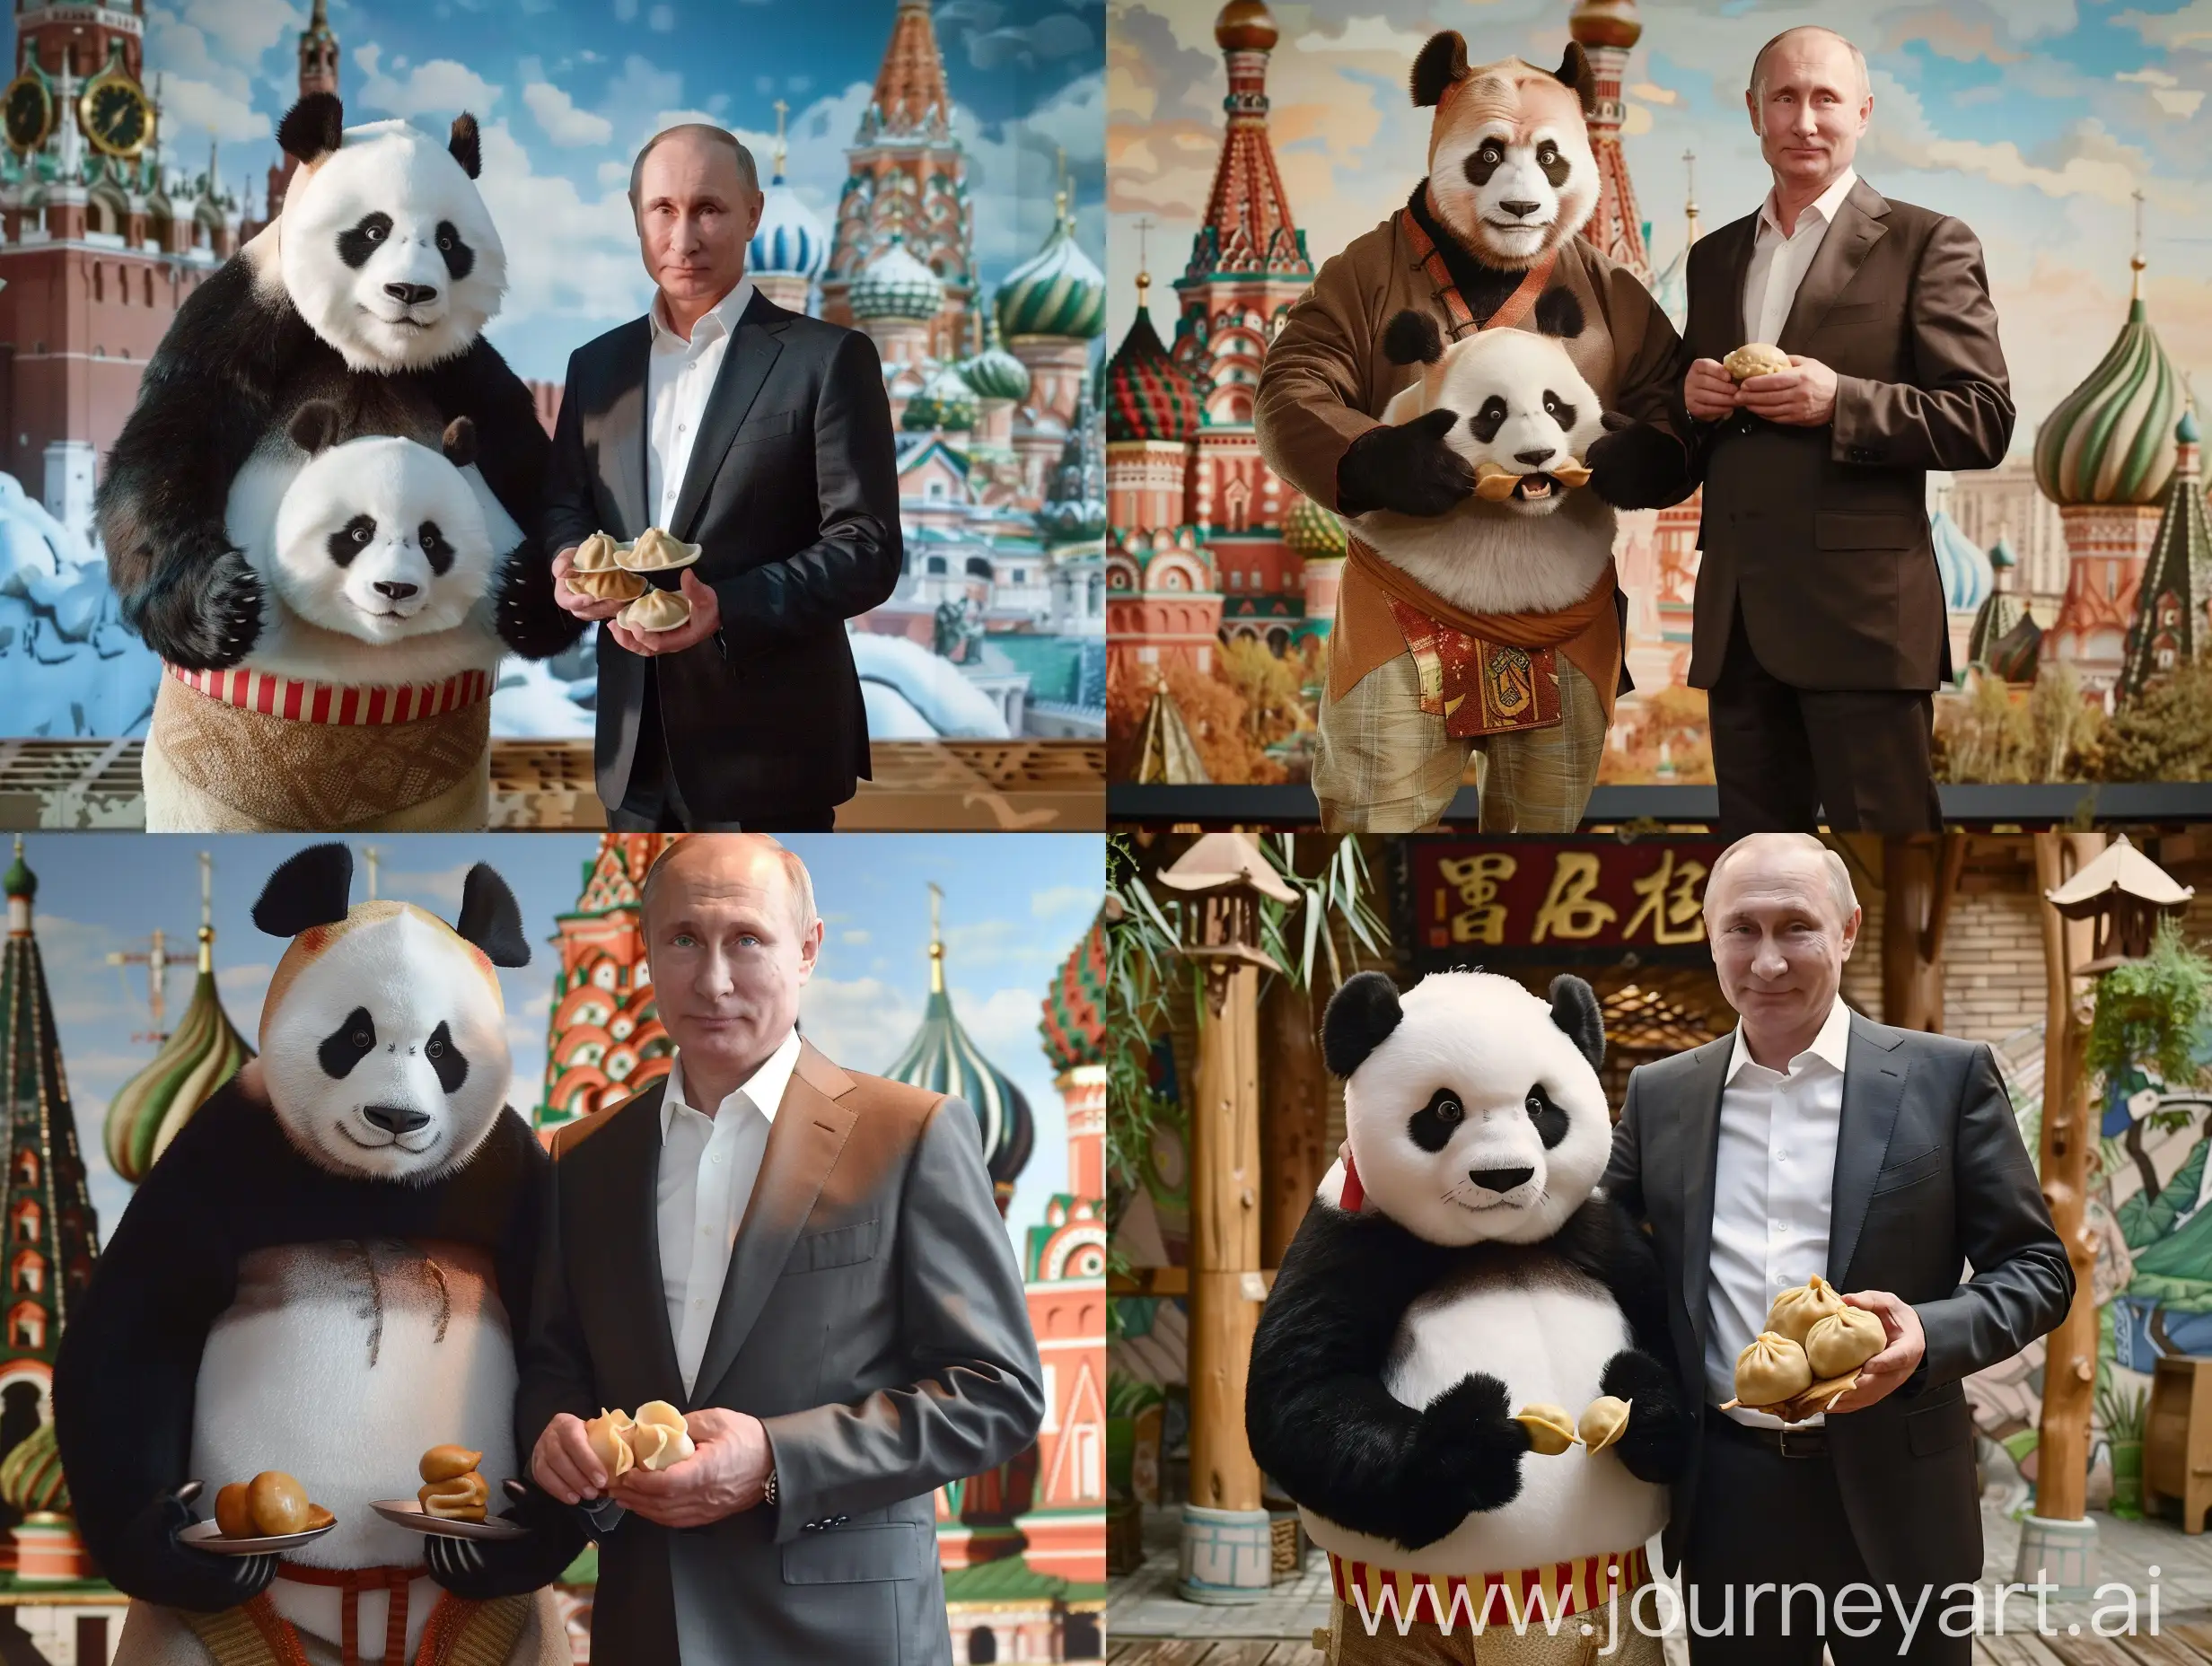 Vladimir Putin stands next to a Kung Fu panda with dumplings in his hands, Moscow background